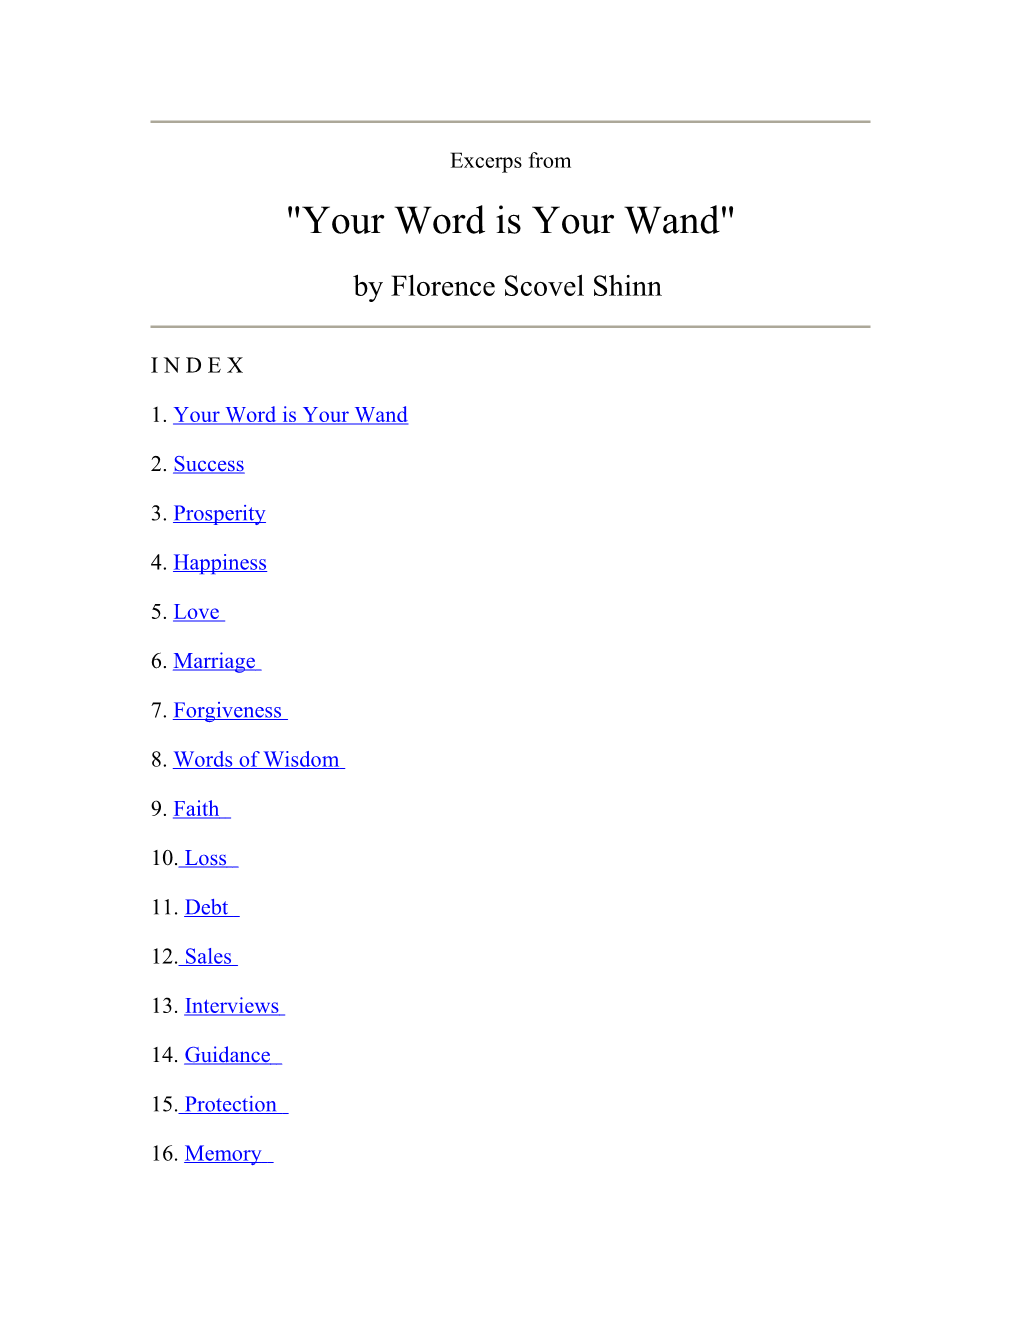 Your Word Is Your Wand by Florence Scovel Shinn